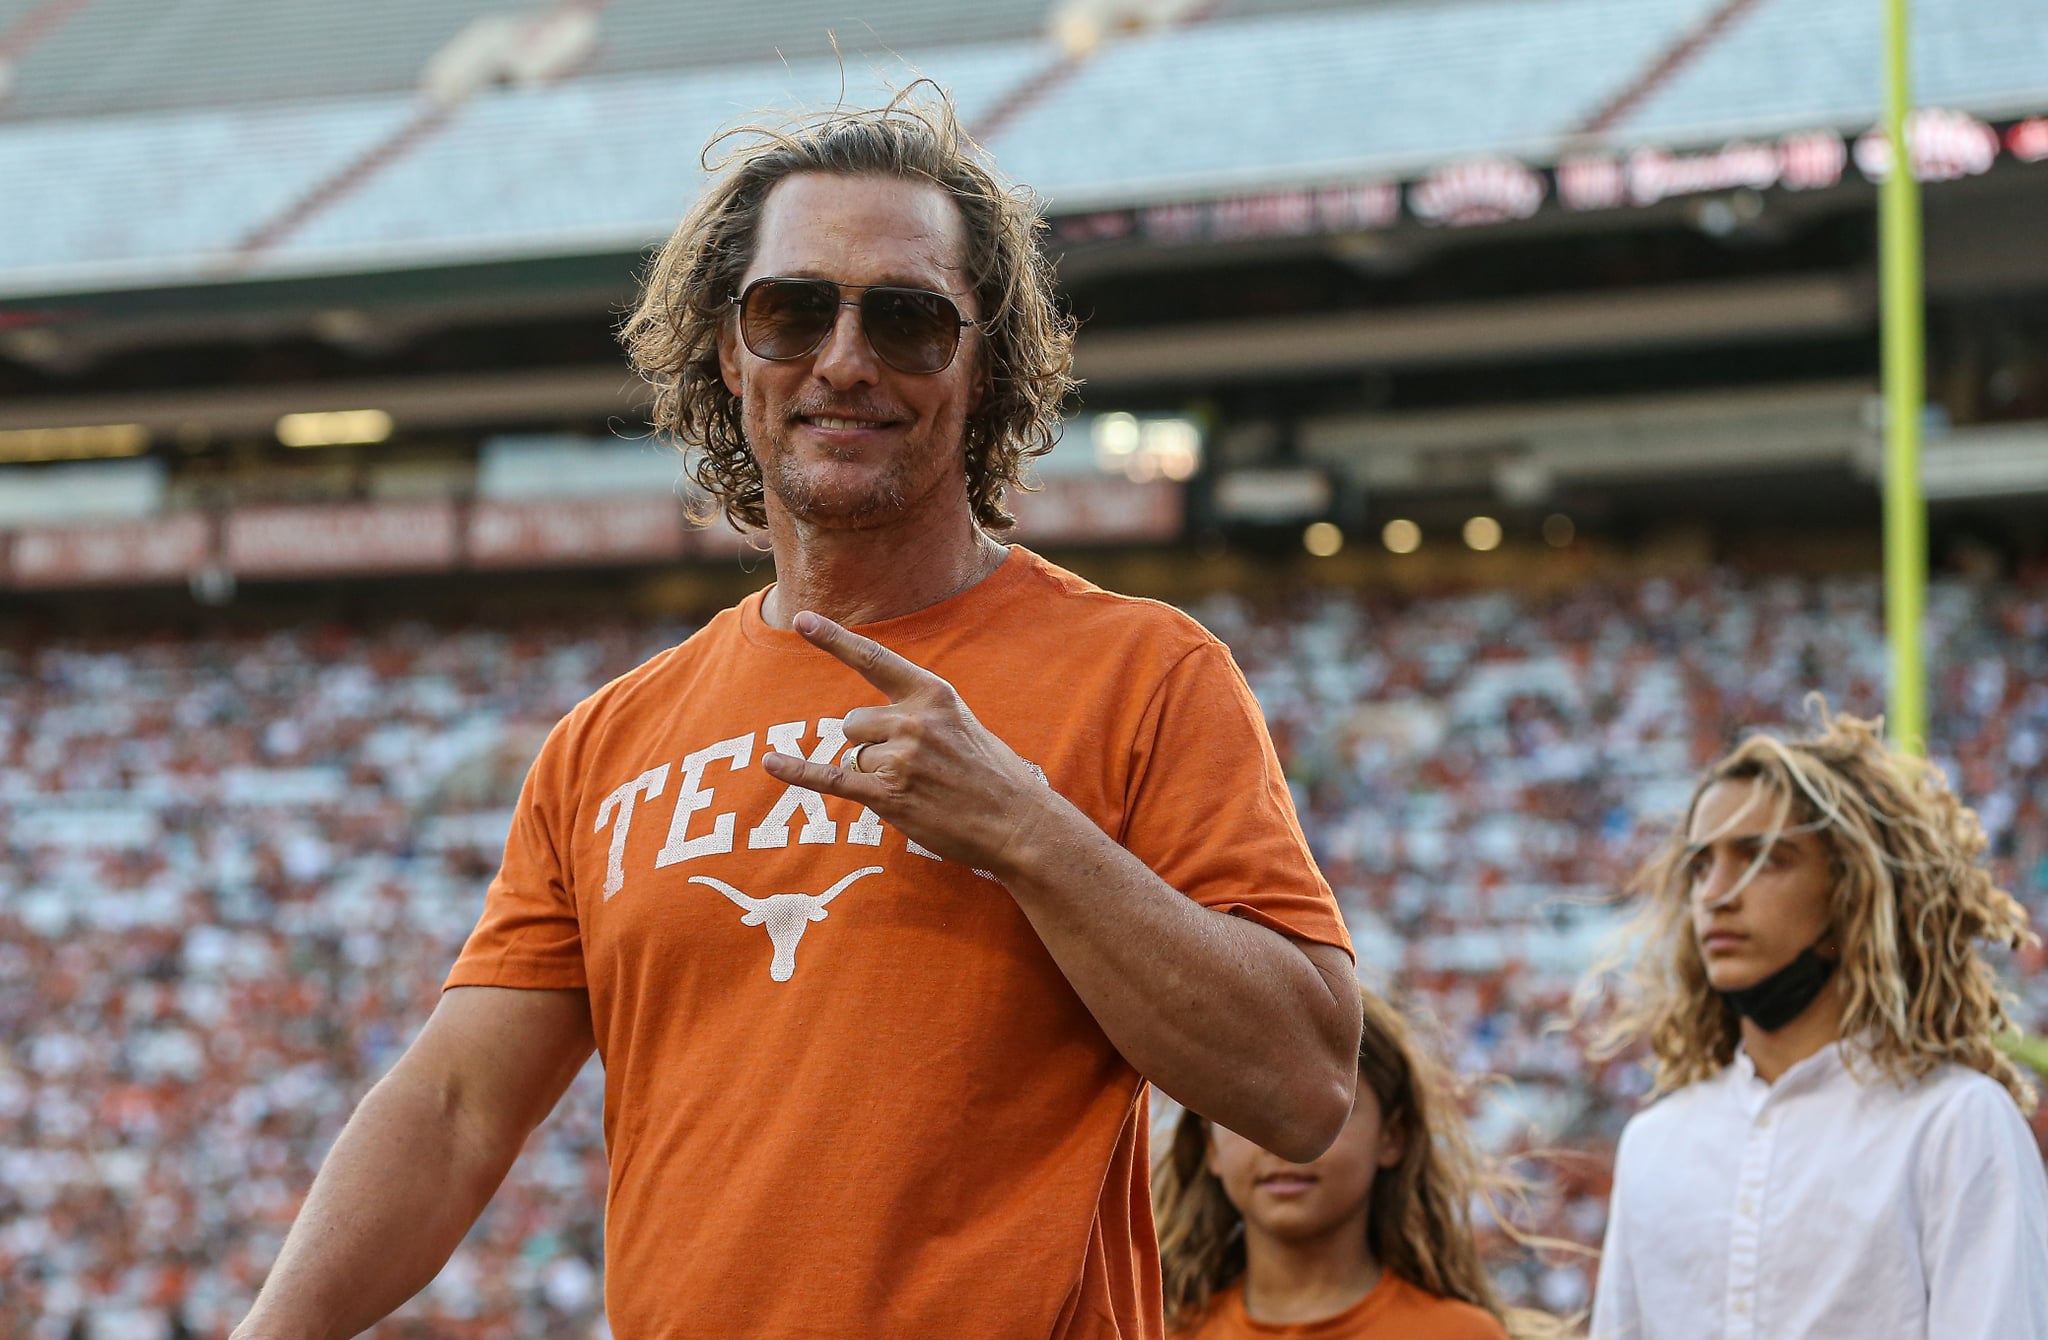 AUSTIN, TEXAS - APRIL 23: Actor Matthew McConaughey attends the Orange-White Spring Game at Darrell K Royal-Texas Memorial Stadium on April 23, 2022 in Austin, Texas. (Photo by Tim Warner/Getty Images)